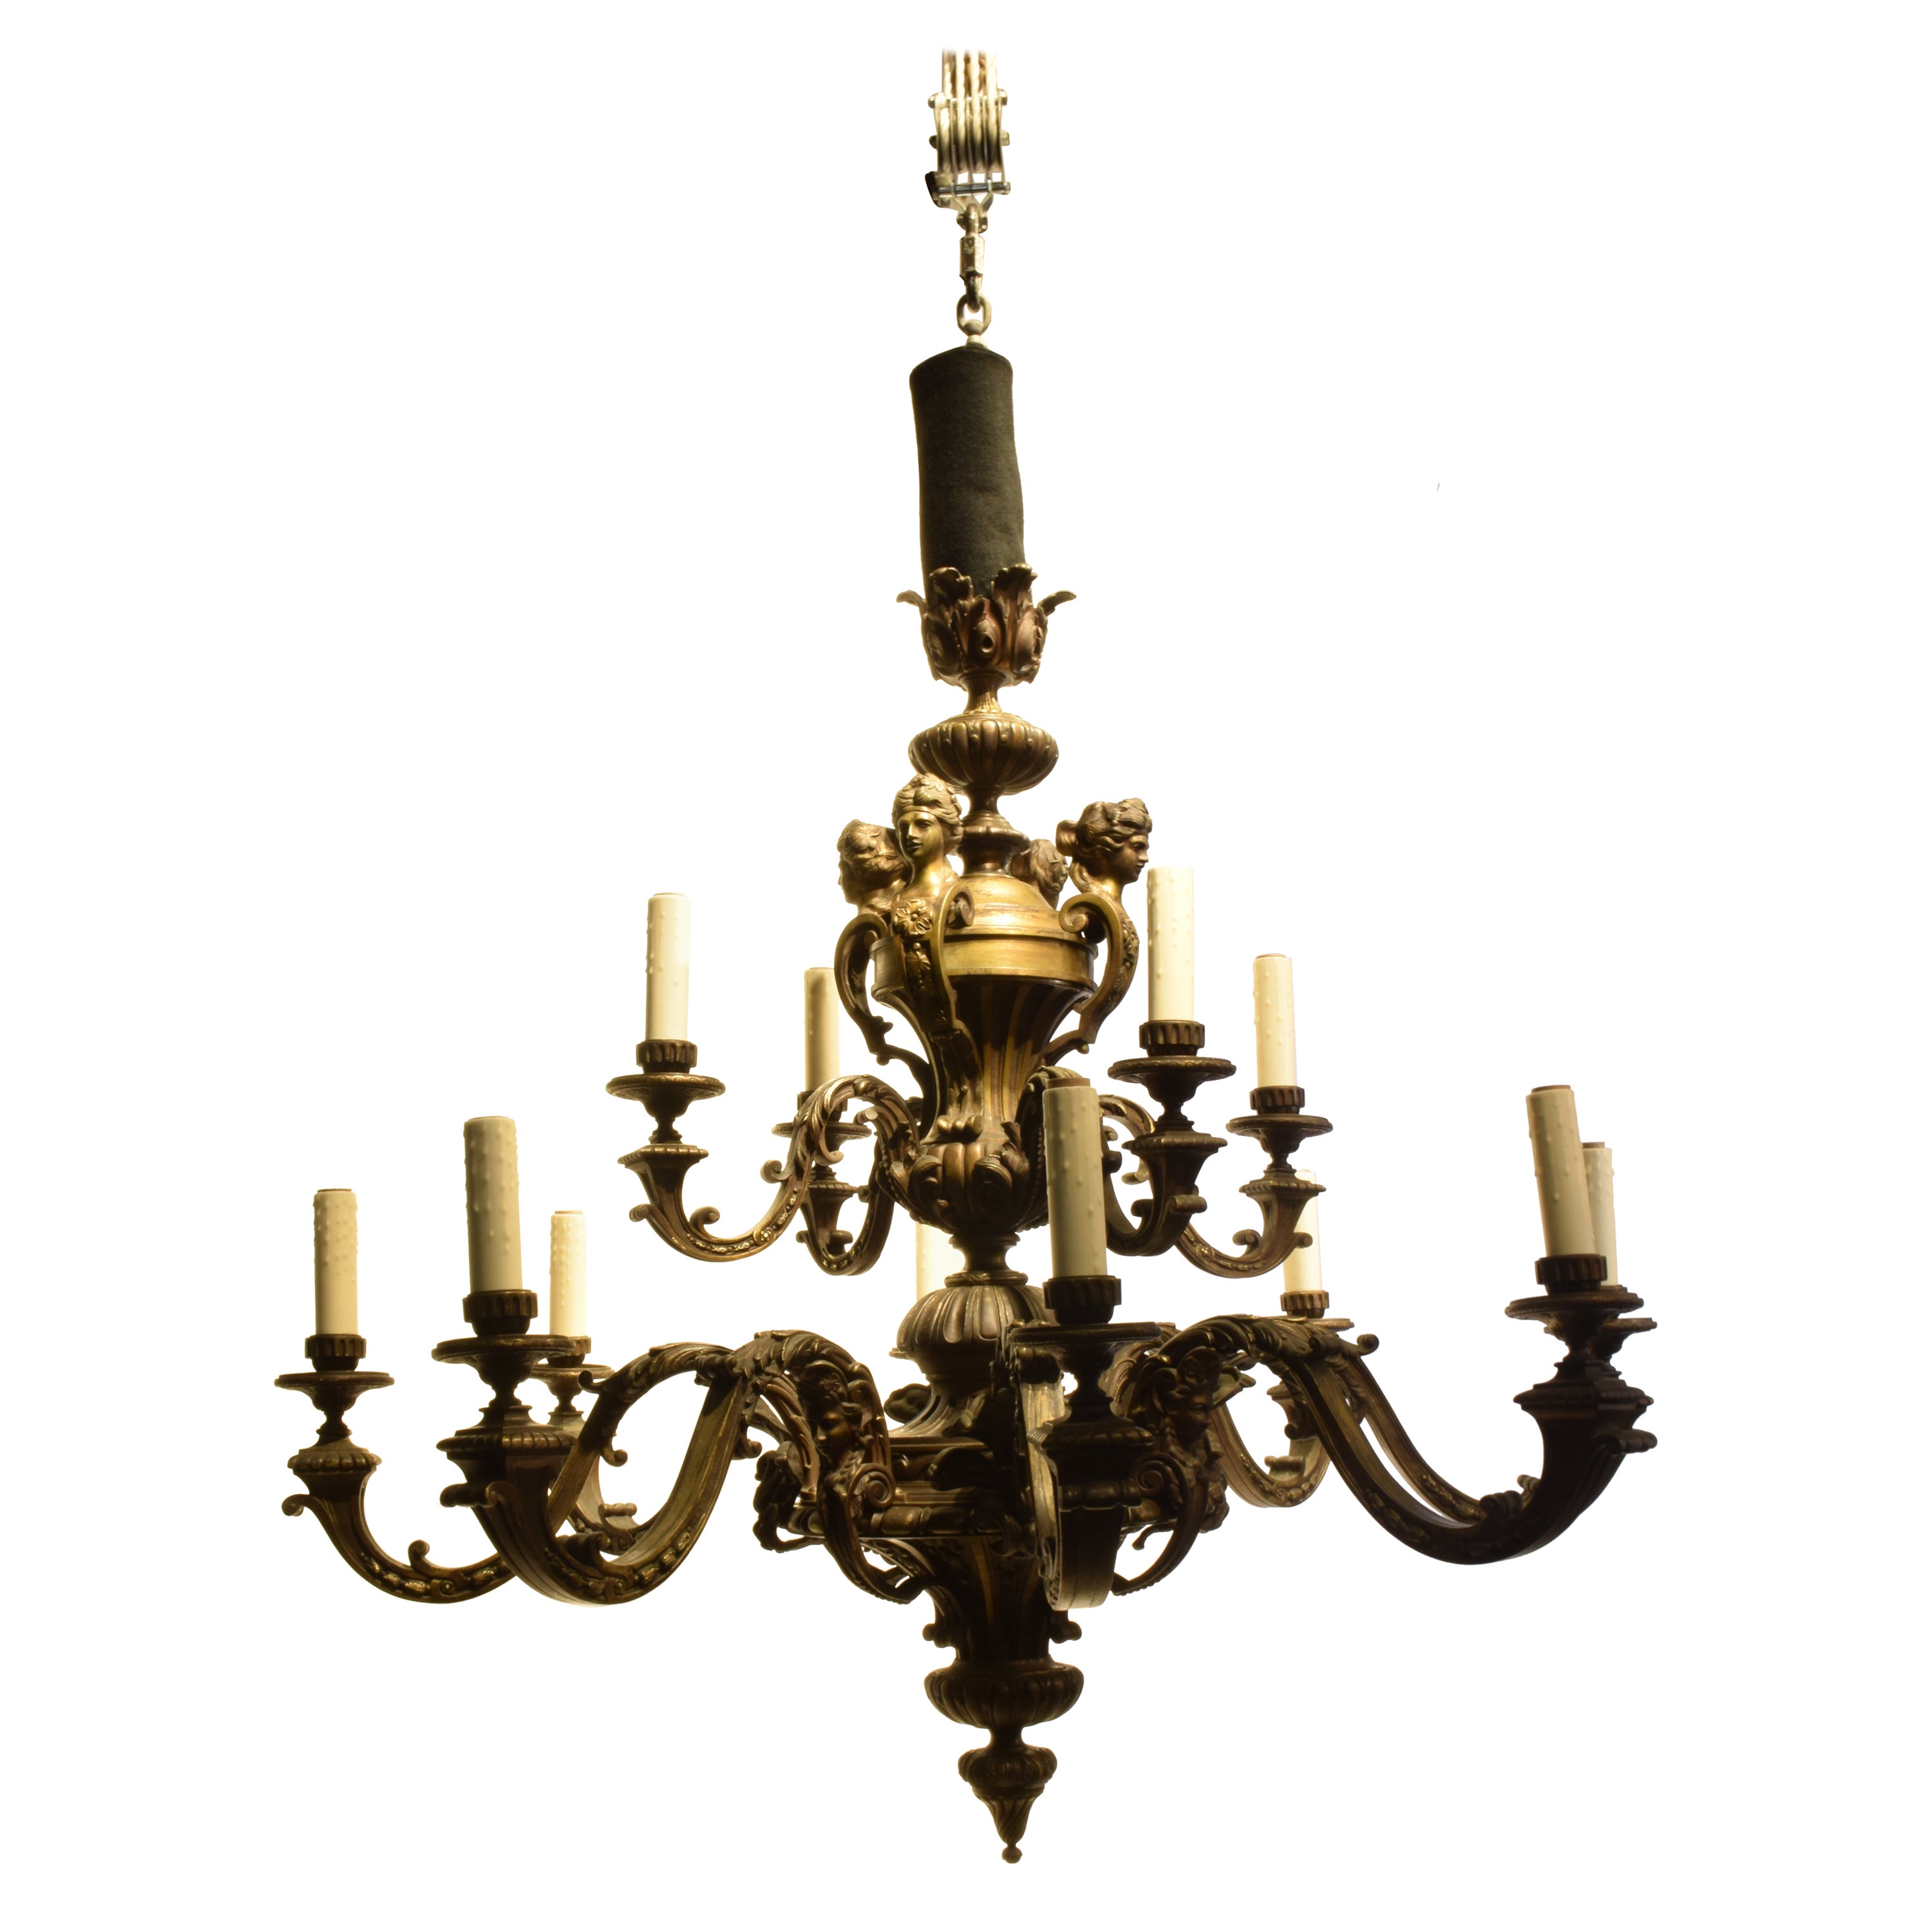 A Very Fine Gilt Bronze Chandelier For Sale